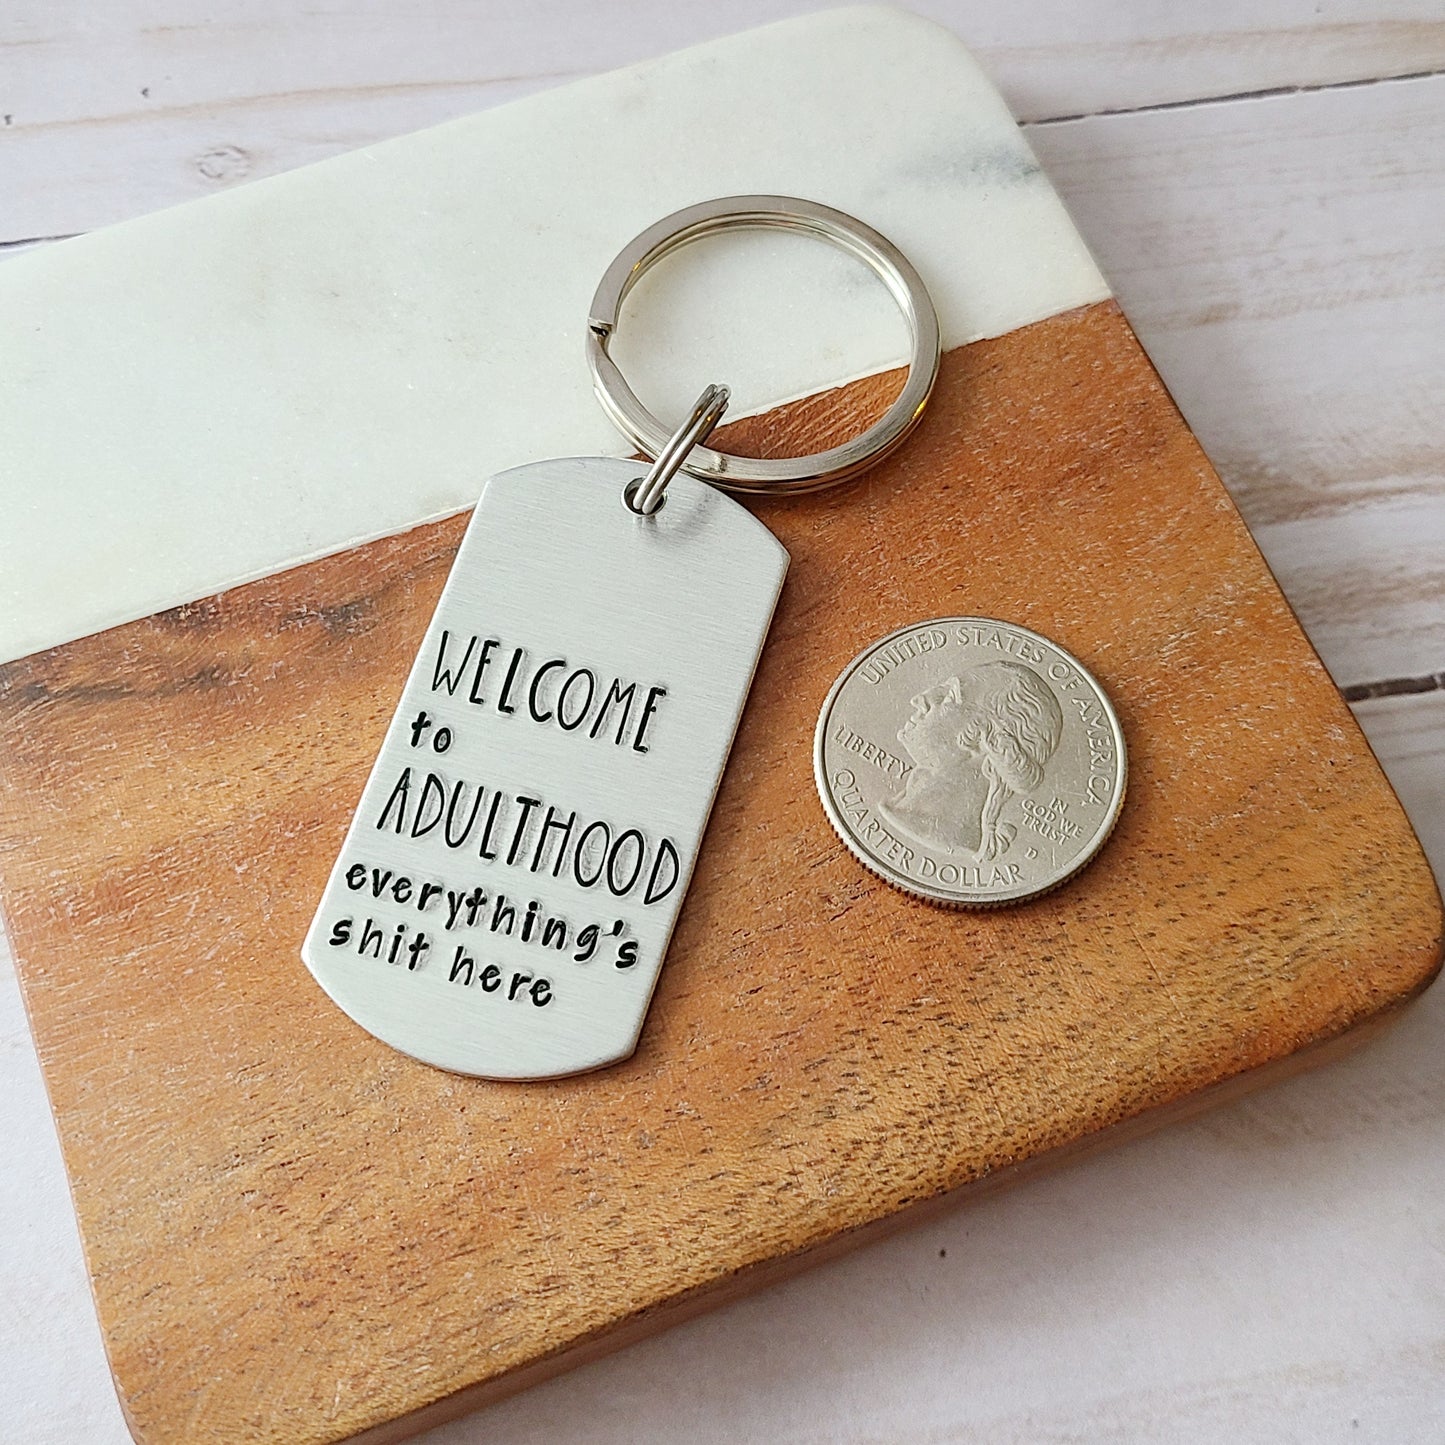 Welcome to Adulthood, Everything's Shit Here Keychain